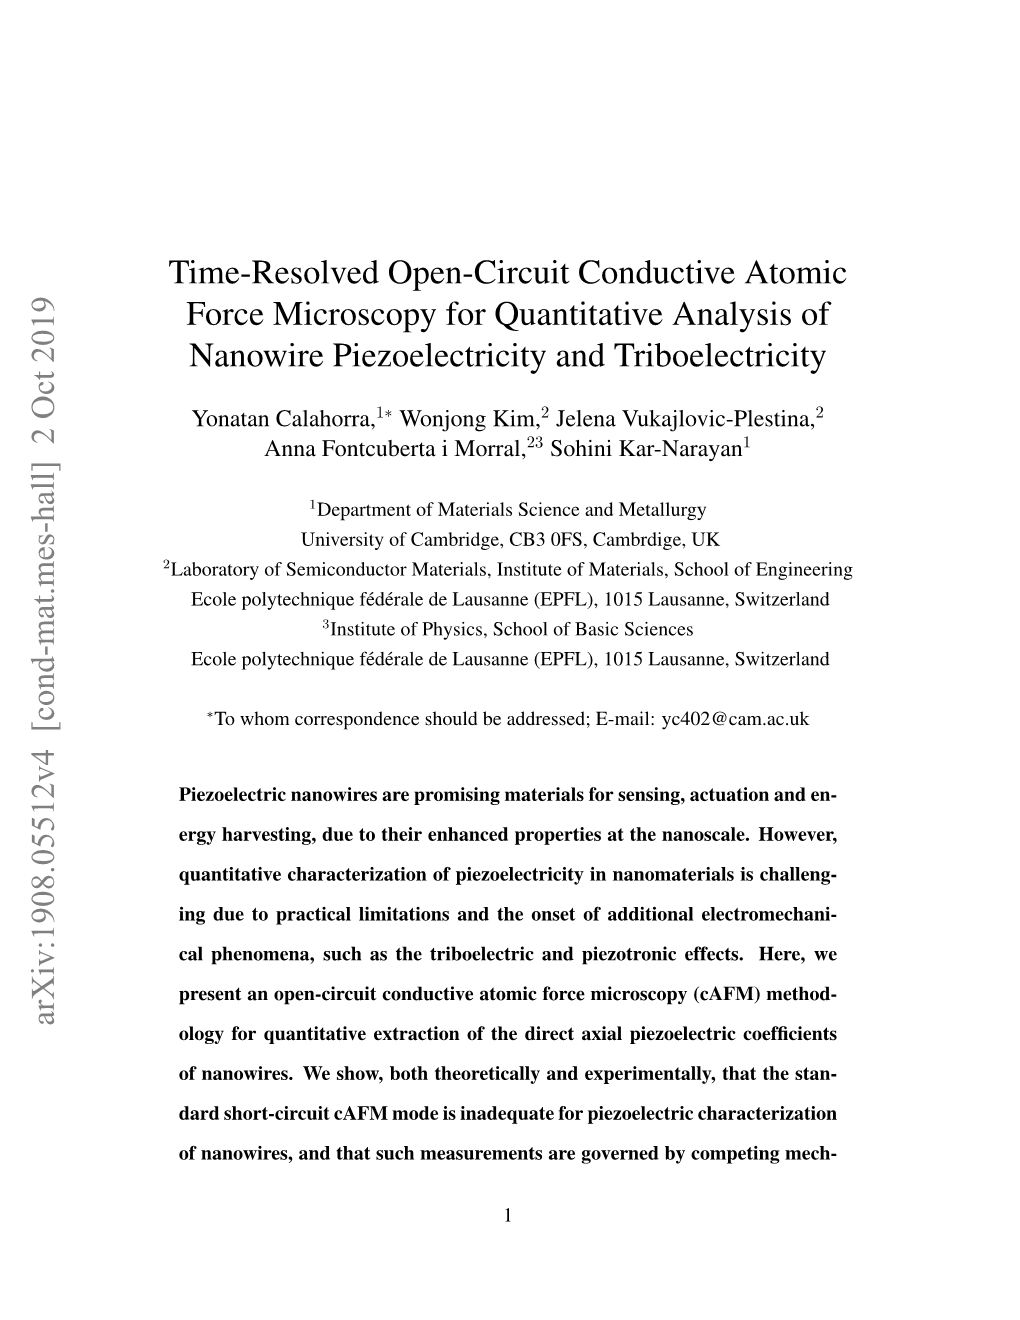 Time-Resolved Open-Circuit Conductive Atomic Force Microscopy for Quantitative Analysis of Nanowire Piezoelectricity and Triboelectricity